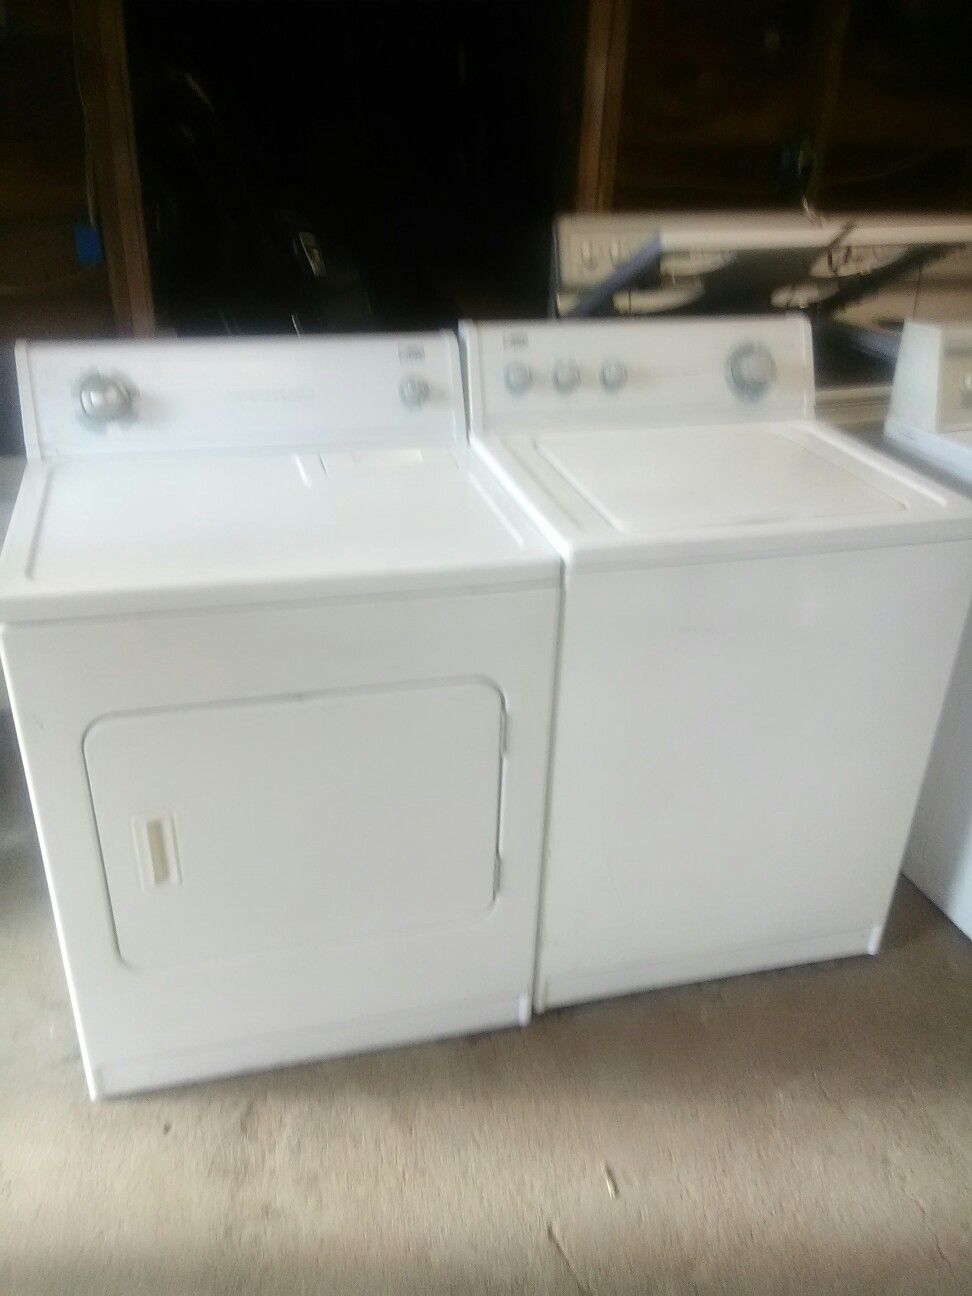 Kenmore washer and dryer set less than 5 years old